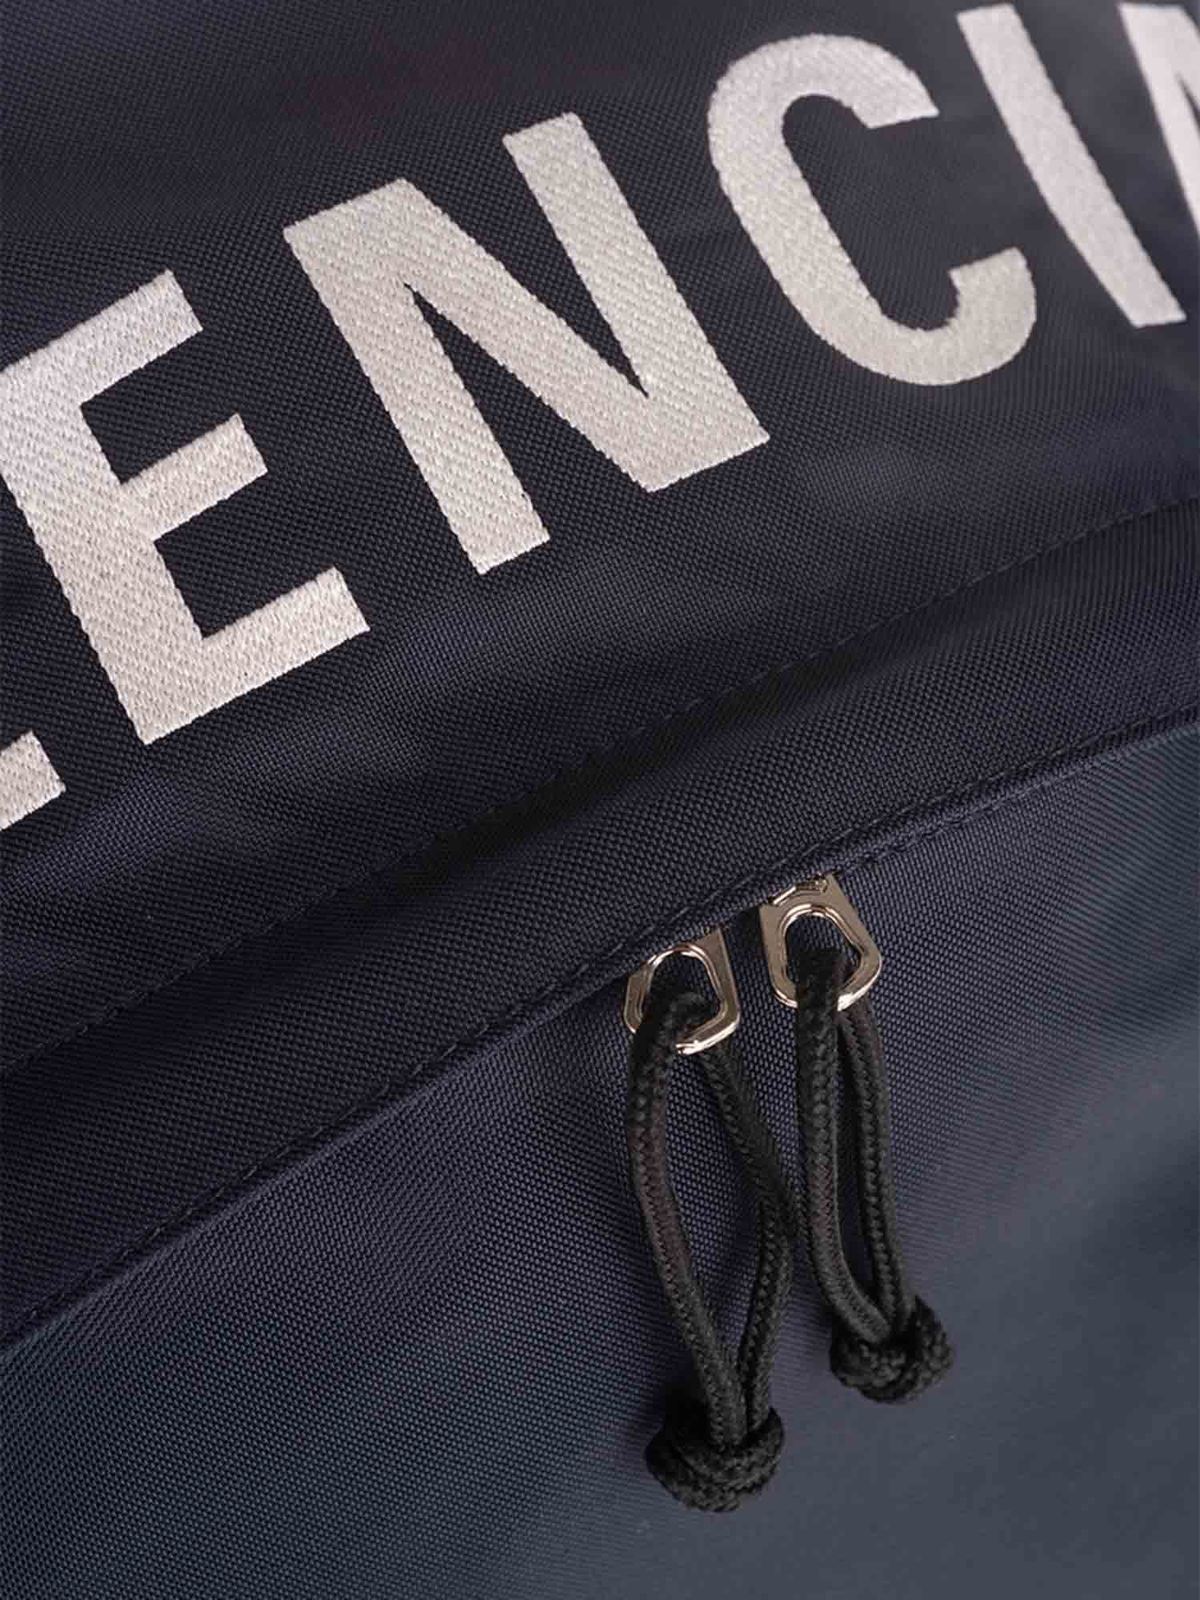 Backpacks Balenciaga - Wheel backpack in navy blue and red 